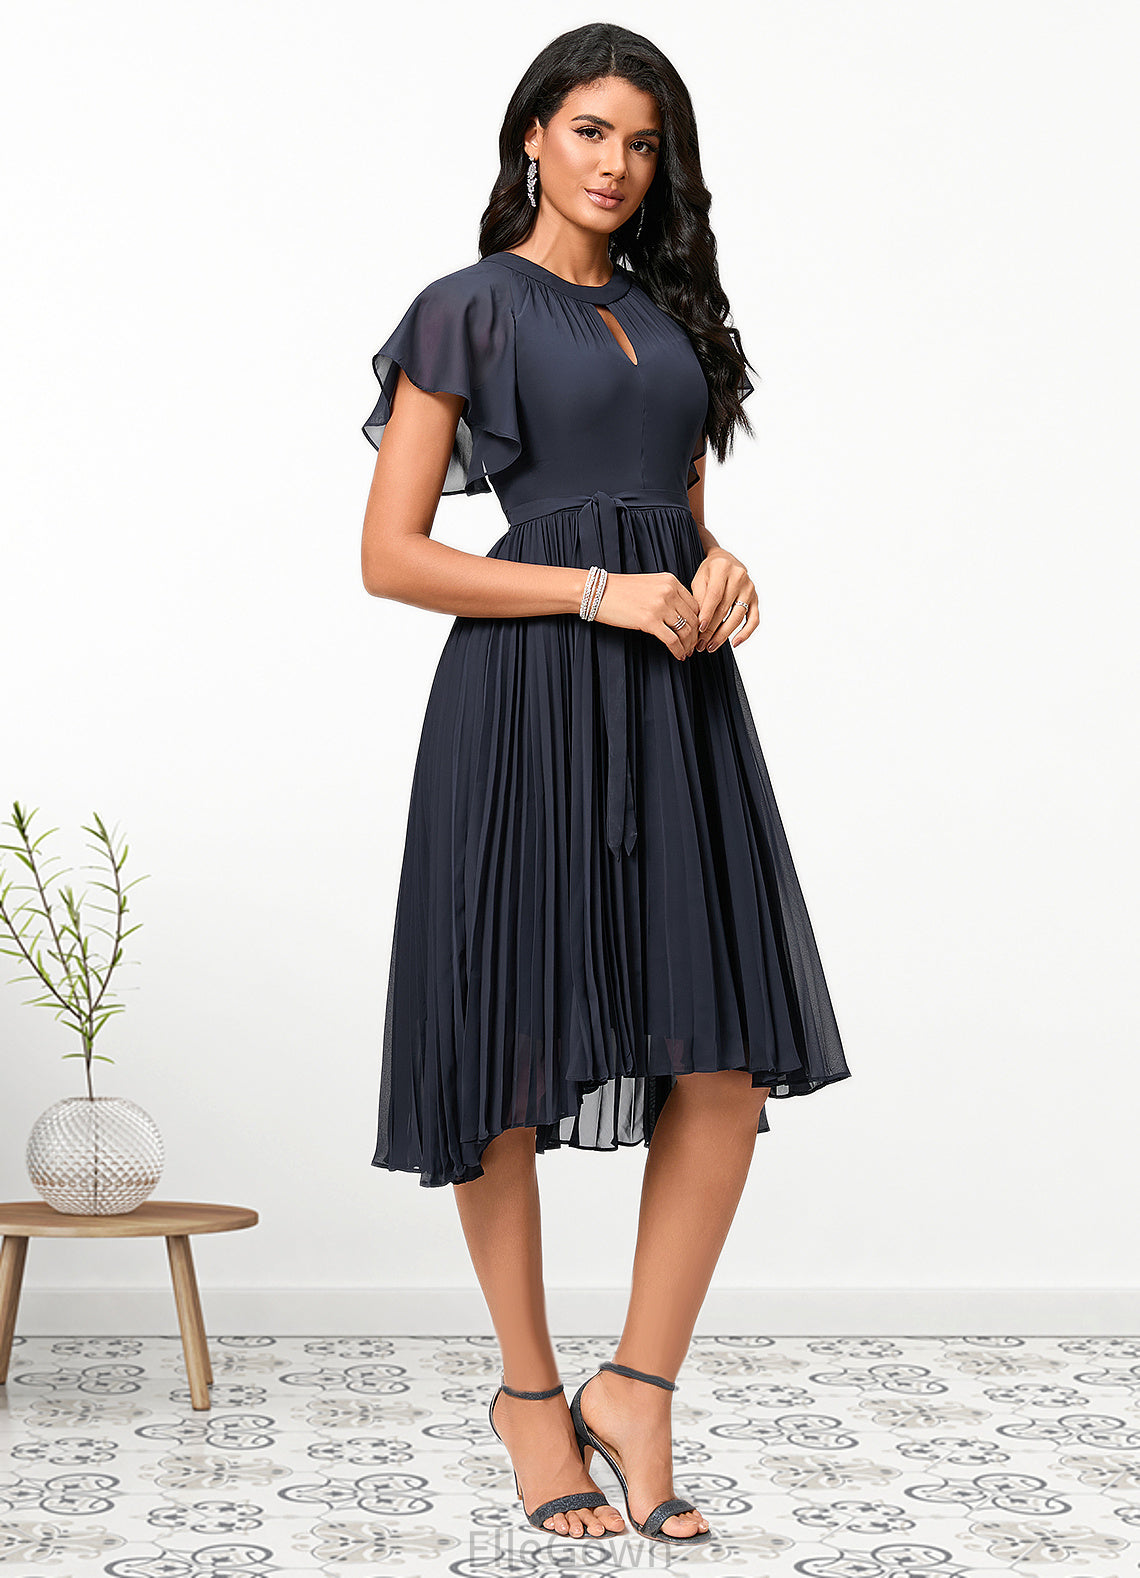 Undine A-line Scoop Asymmetrical Chiffon Cocktail Dress With Bow Pleated DEP0022530